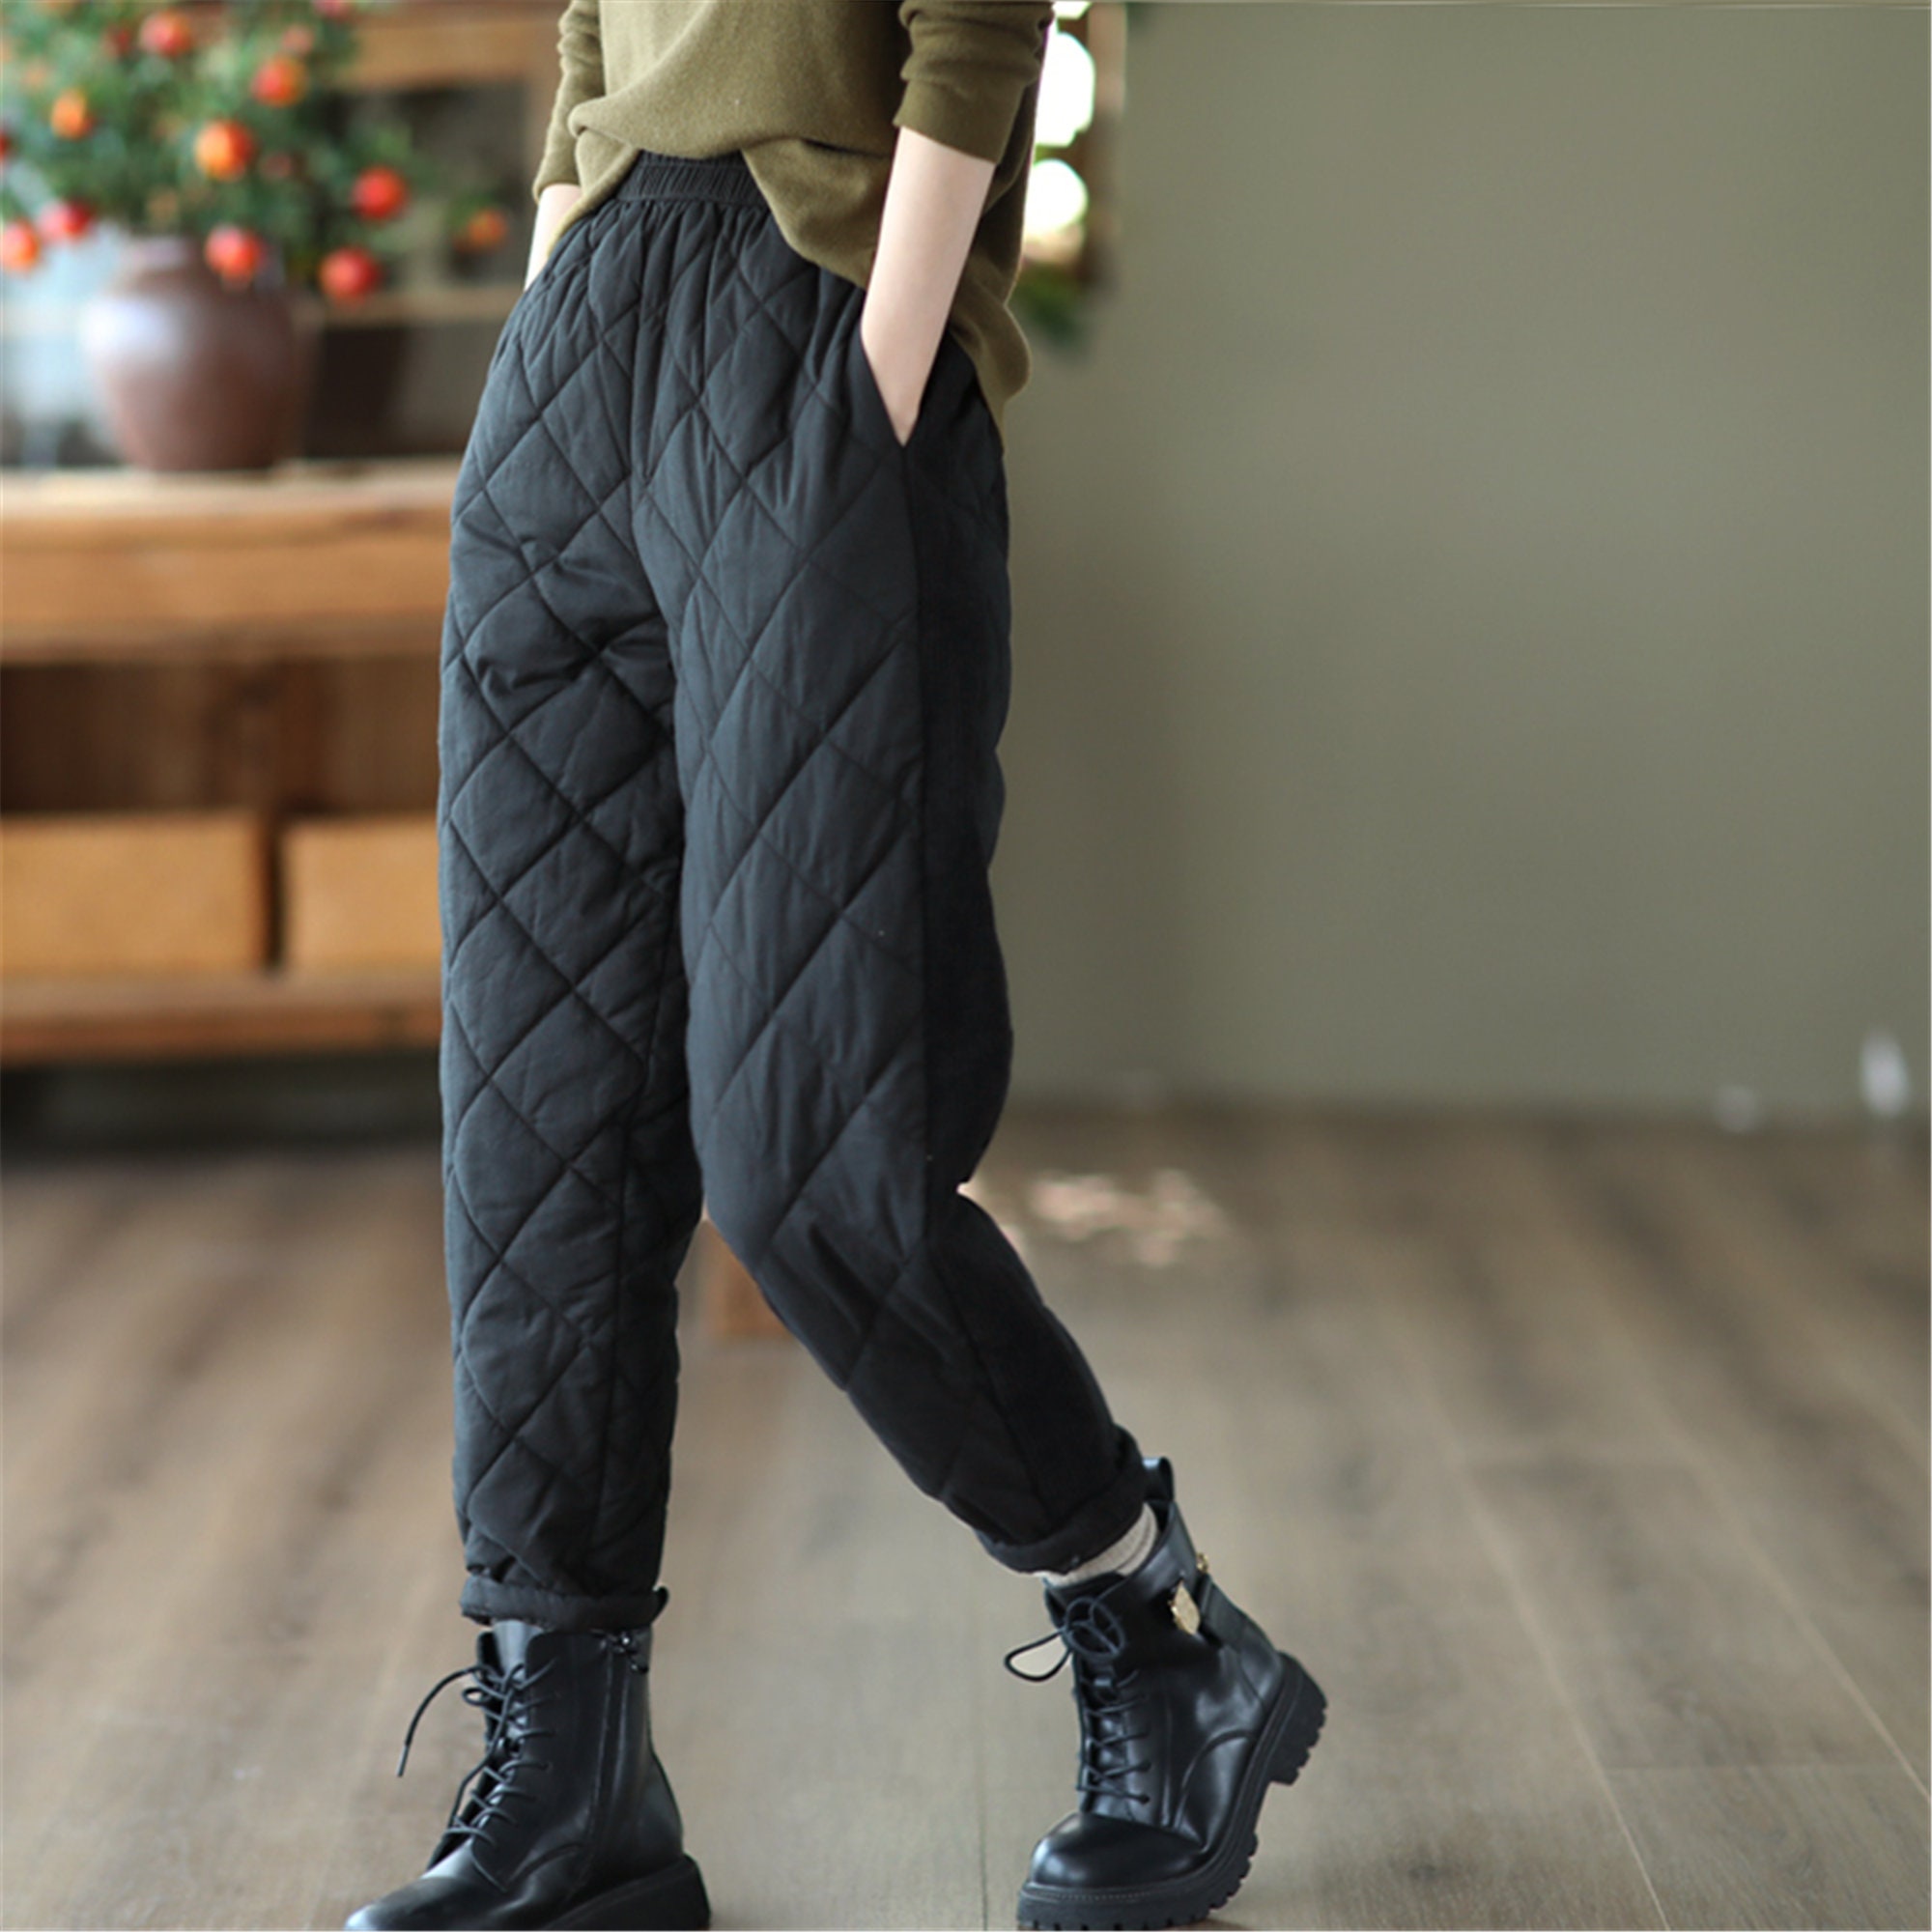 New Winter Warm Down Cotton Pants Women Fashion Padded Quilted